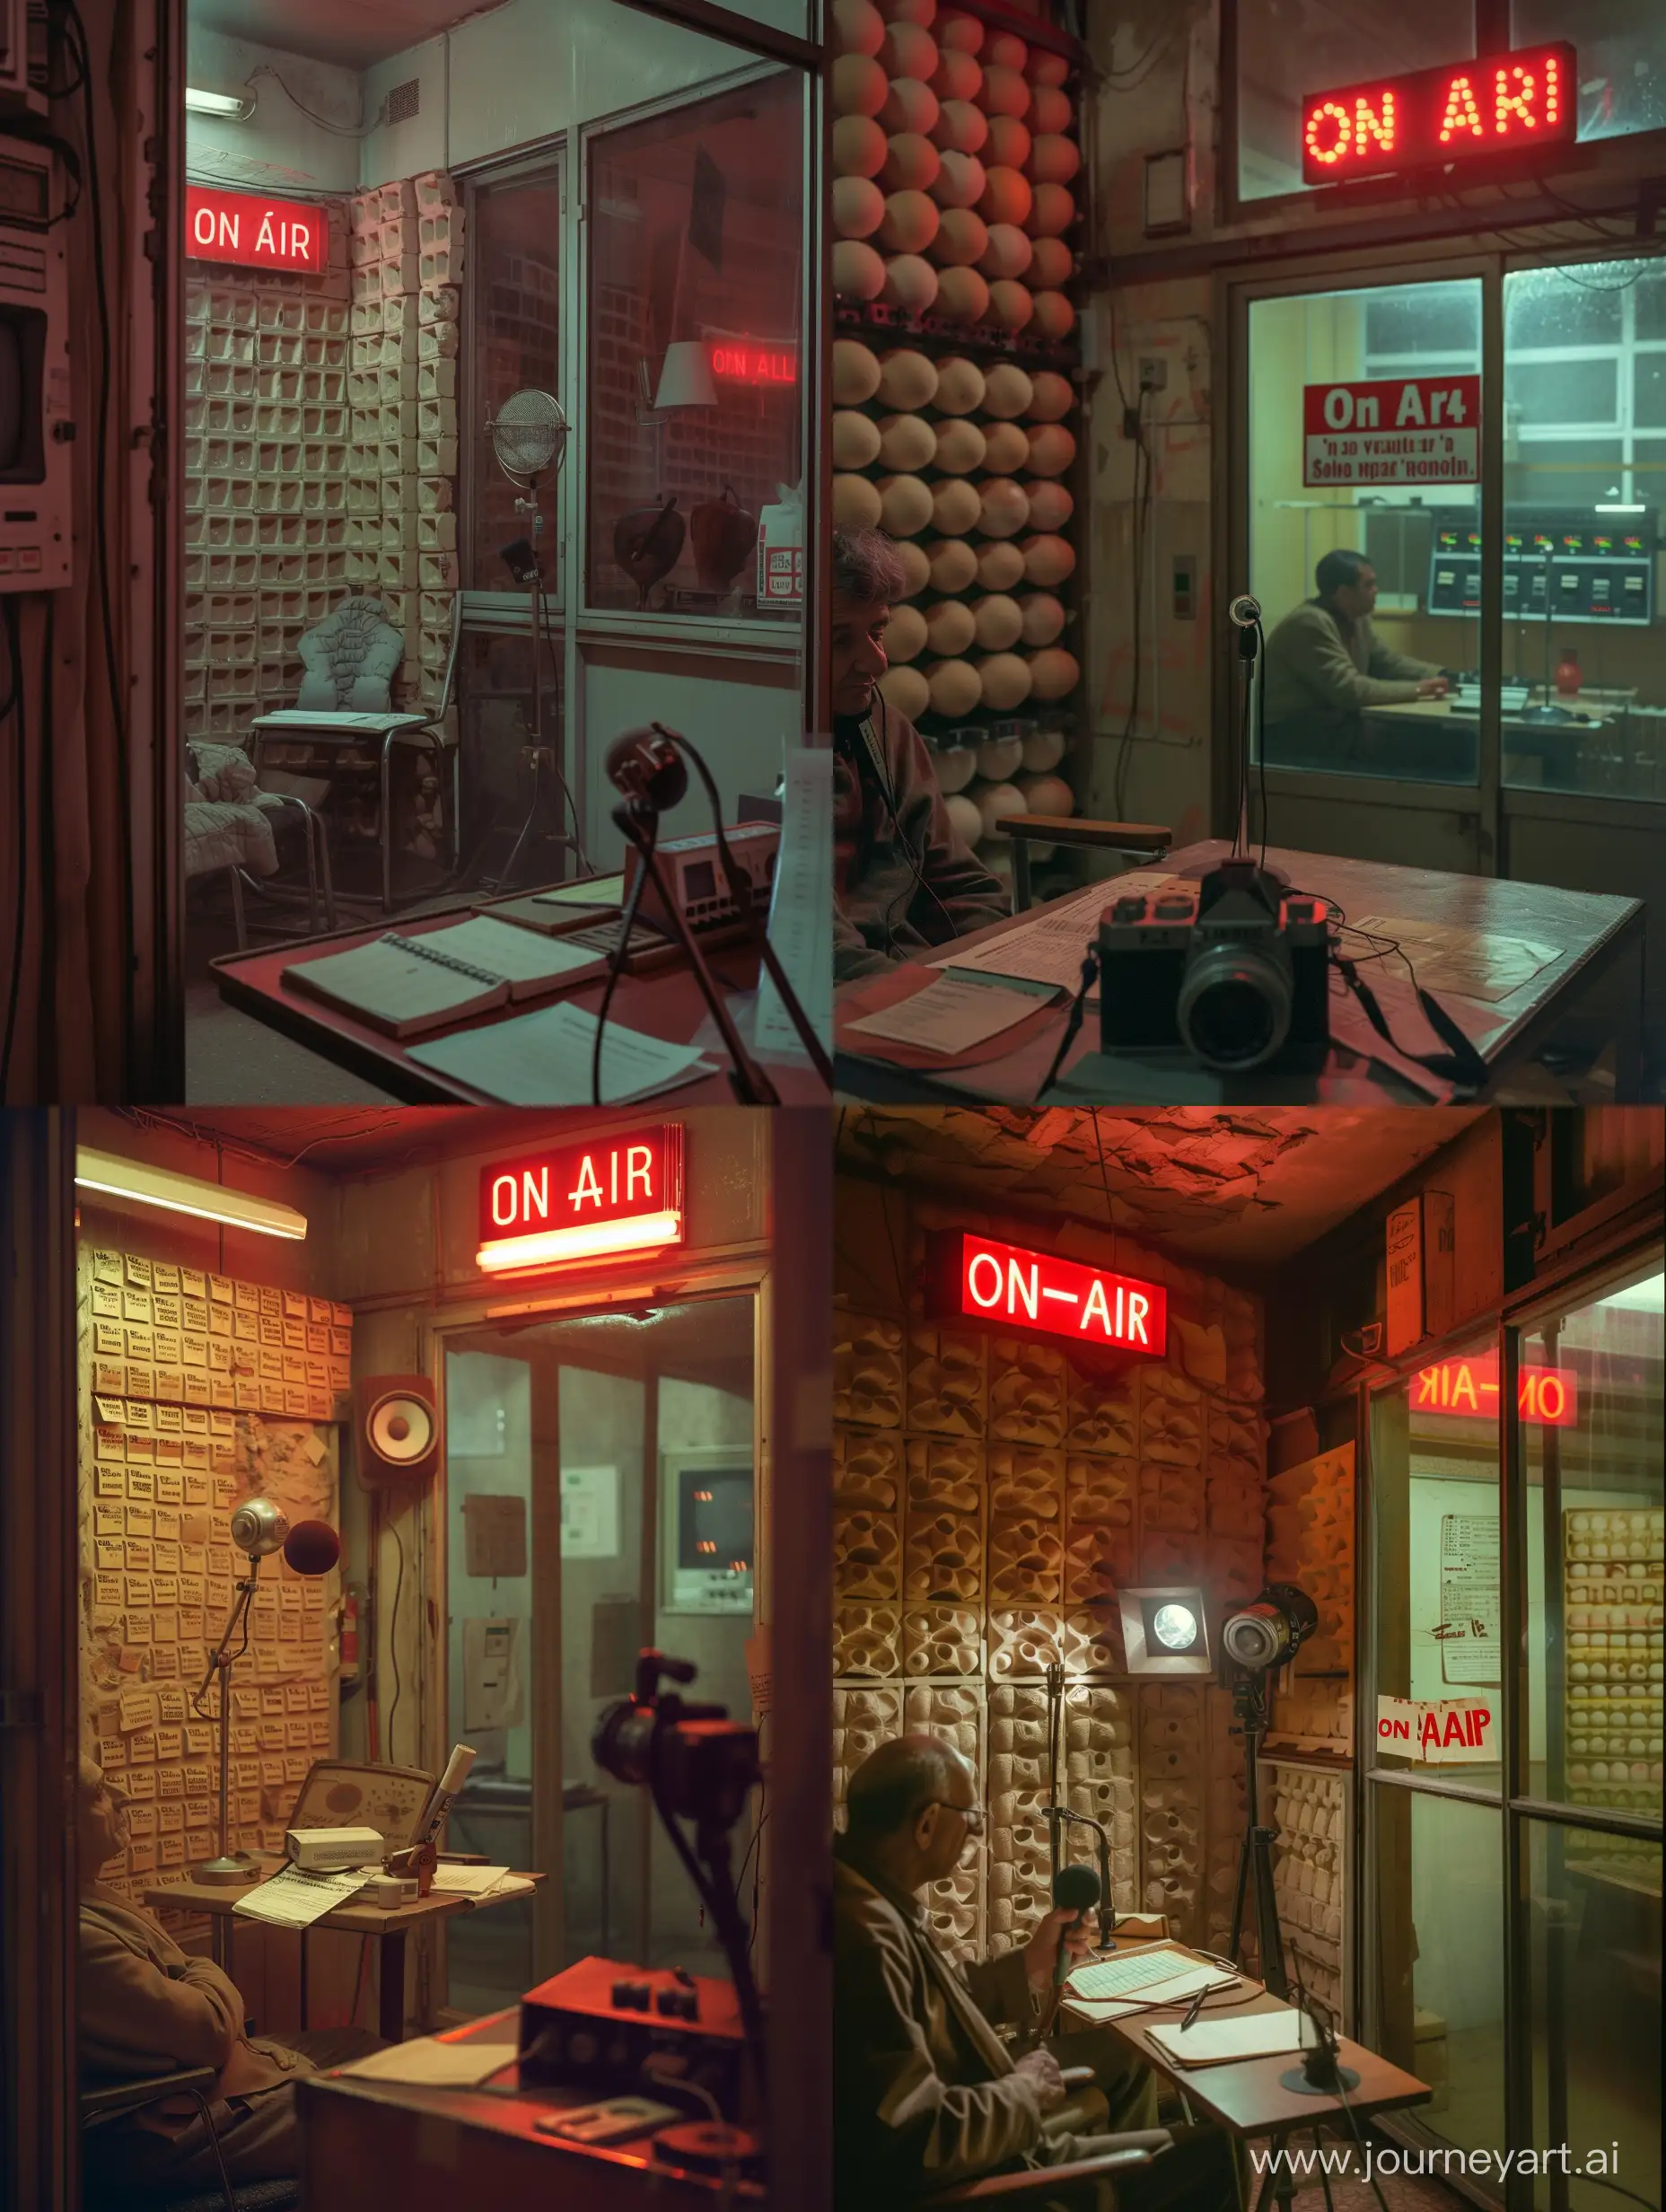 realistic color photograph of an Italian radio station from 1980 taken with a Leica R4 camera. the scene takes place in the transmission room. it is a small room with the walls covered with cartons to transport the eggs, the eggs are not present. on one side of the room there is a large glass that allows the speaker to communicate with gestures with the next room where the control room is located. Above the glass there is an illuminated sign that lights up in red with the words "on air" when it is transmitting. the room is very bare: there is a chair, a table with the microphone on it and the notes used by the speaker during his broadcast and a small red light on the ceiling which creates a dark atmosphere inside. the camera that takes the photo is placed on one side of the table in the speaker's room, and frames the speaker on the left sitting on the chair and with his hands resting on the table. the lens captures half the speaker's face, from the cheeks down, intent on speaking near the microphone and with notes in one hand. on the right side of the photo you can see the glass leading into the control room with the "on air" sign lit in red above it